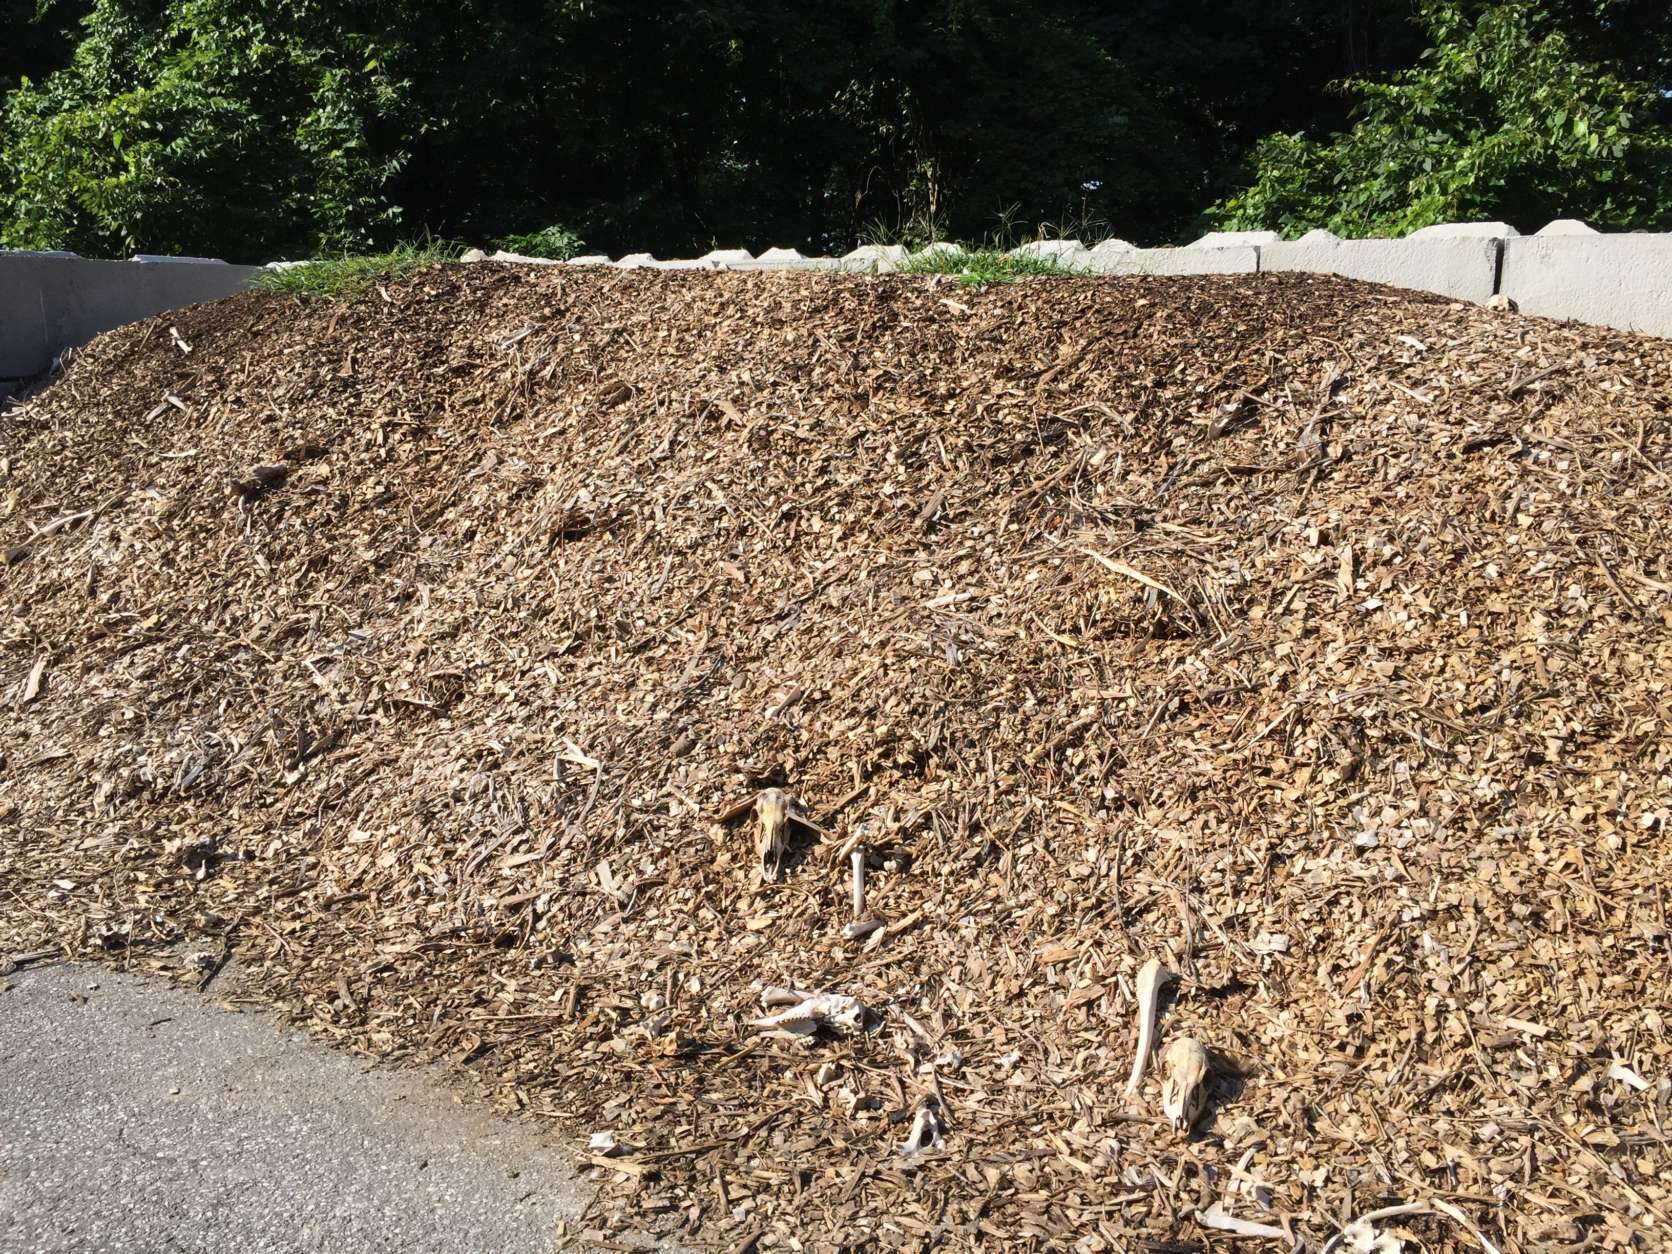 Jim Fogle of the Maryland State Highway Administration said internal temperatures reach 80 to 90 degrees; and that’s enough to reduce the carcass to a little more than bones in about six months. 
(Courtesy SHA/Charlie Gischlar)